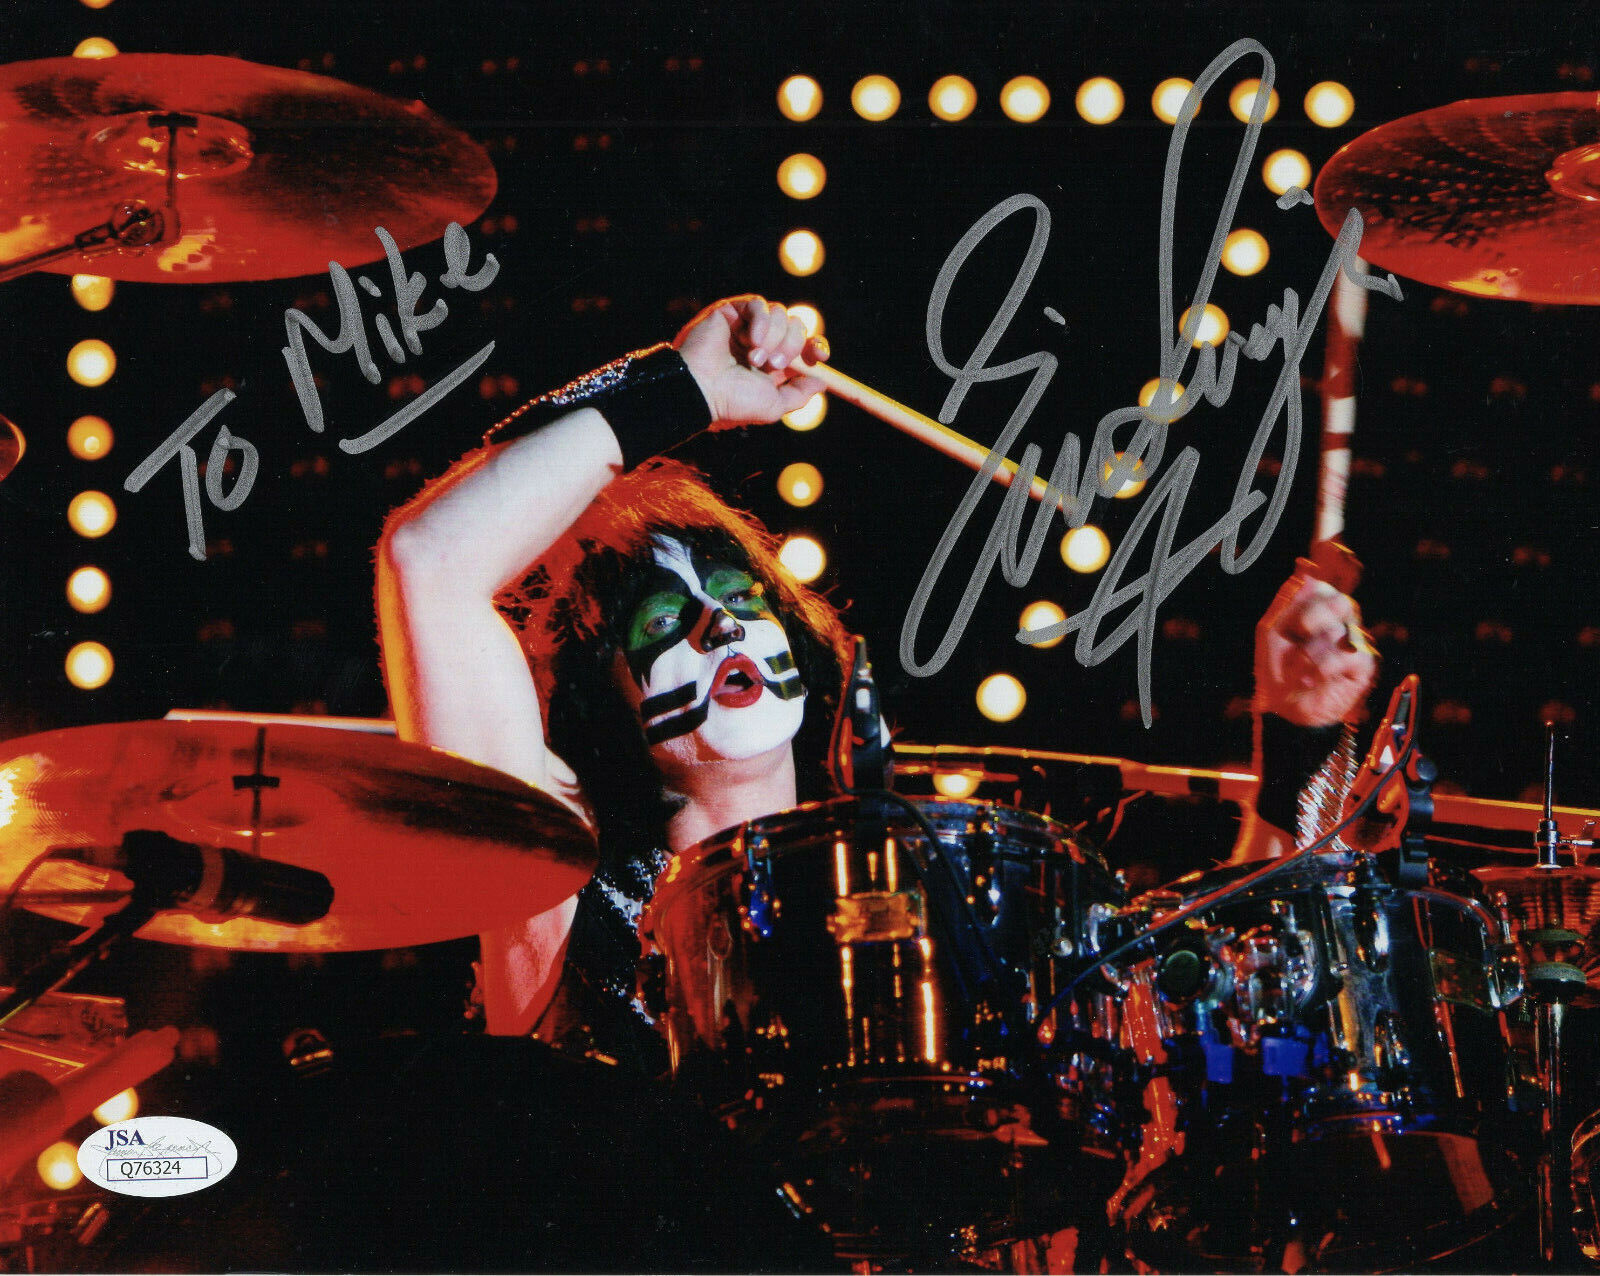 ERIC SINGER HAND SIGNED 8x10 COLOR PHOTO       KISS DRUMMER      TO MIKE     JSA